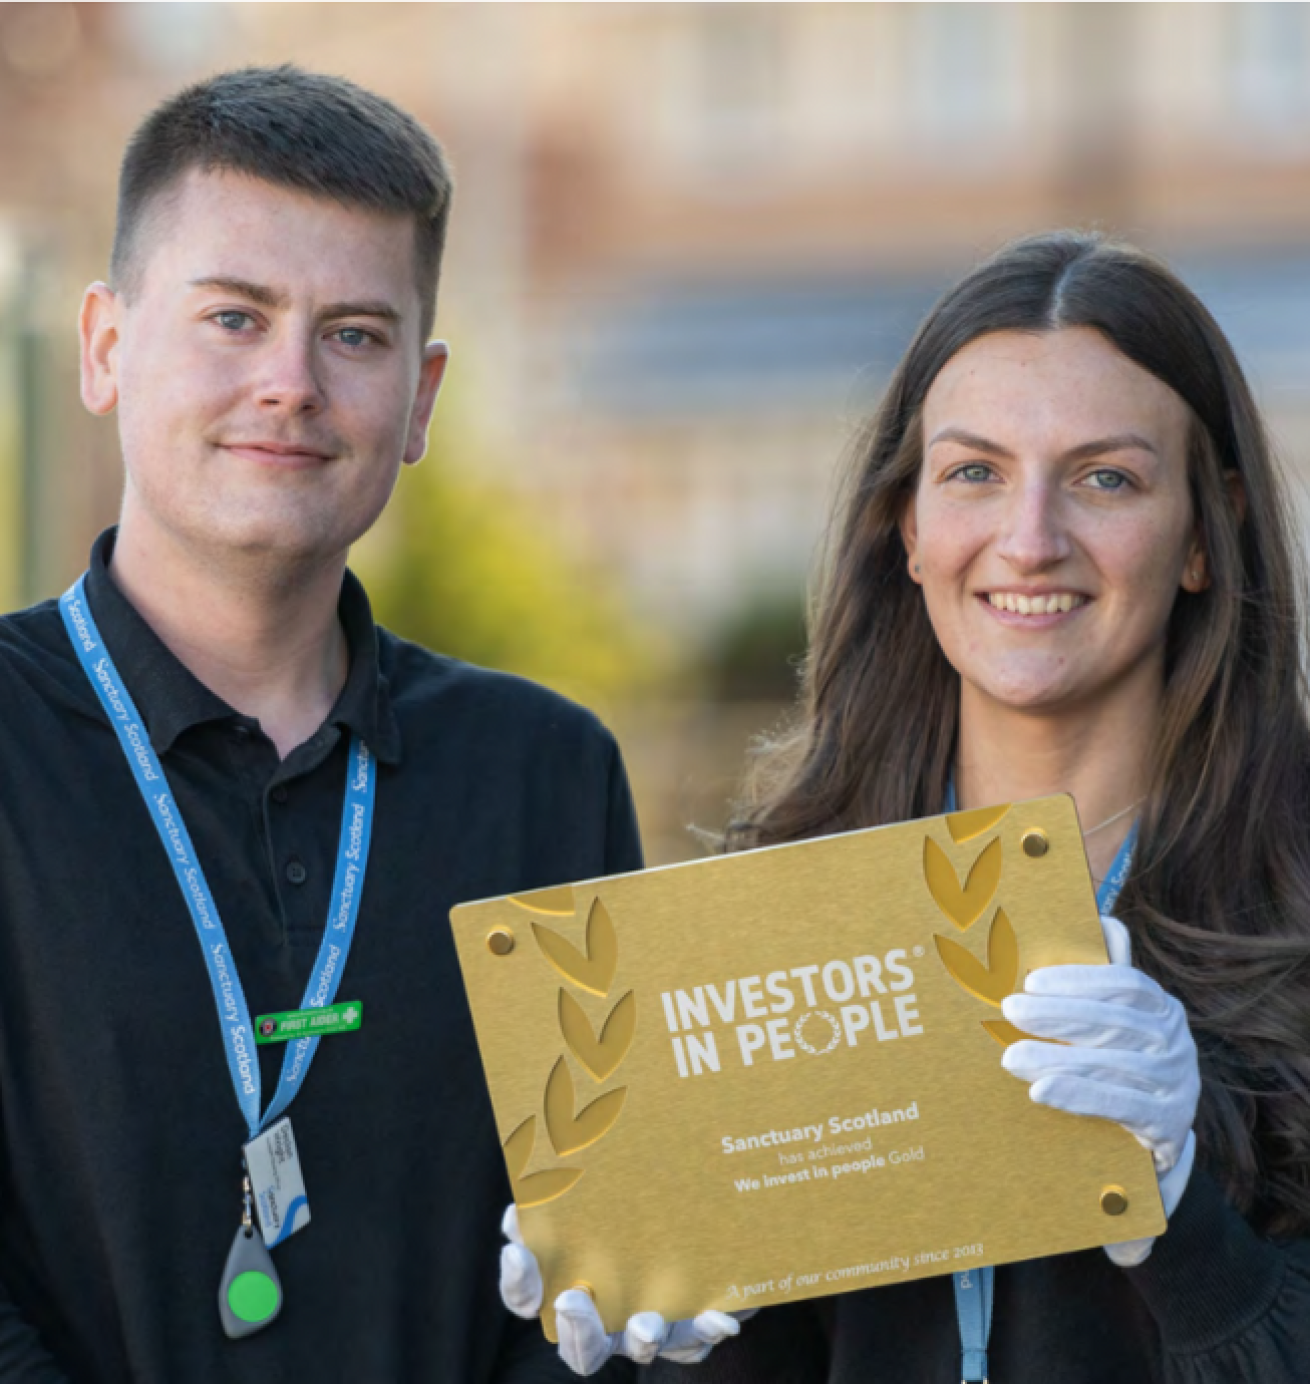 Assistant Housing Officer Declan and Housing Officer Rachel holding the IIP Award Plaque